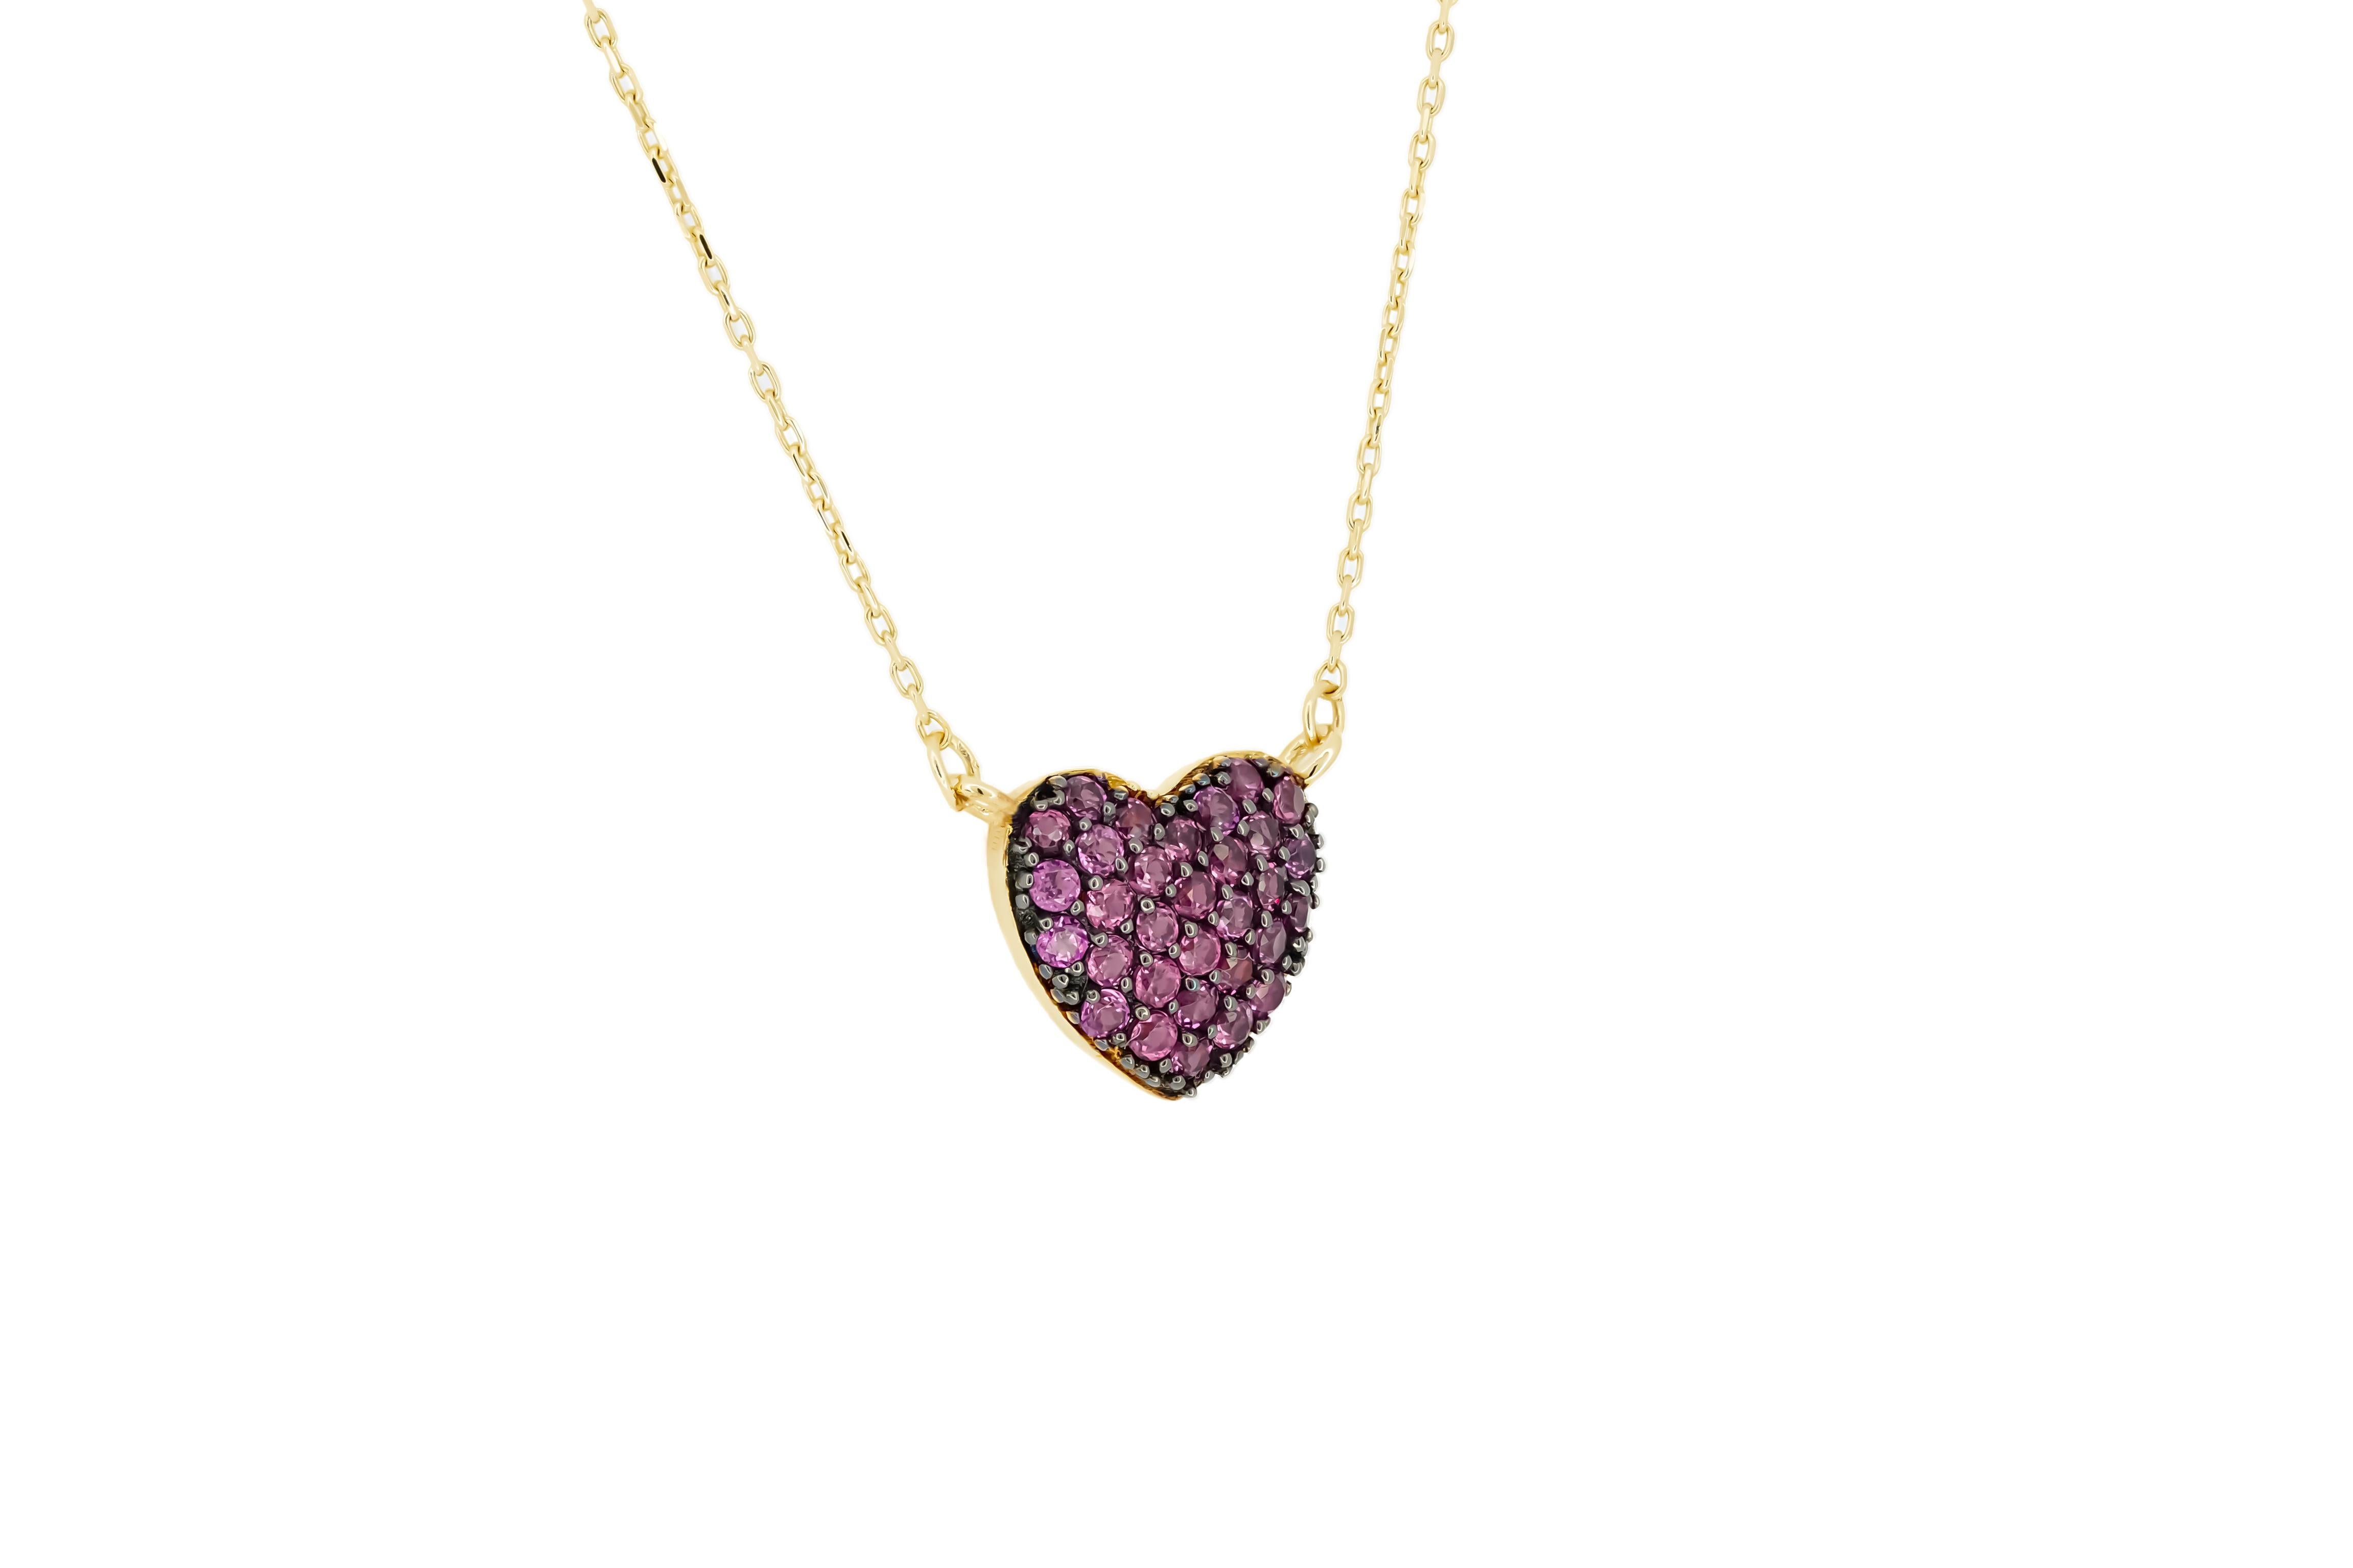 Heart Pendant necklace in 14k gold  1